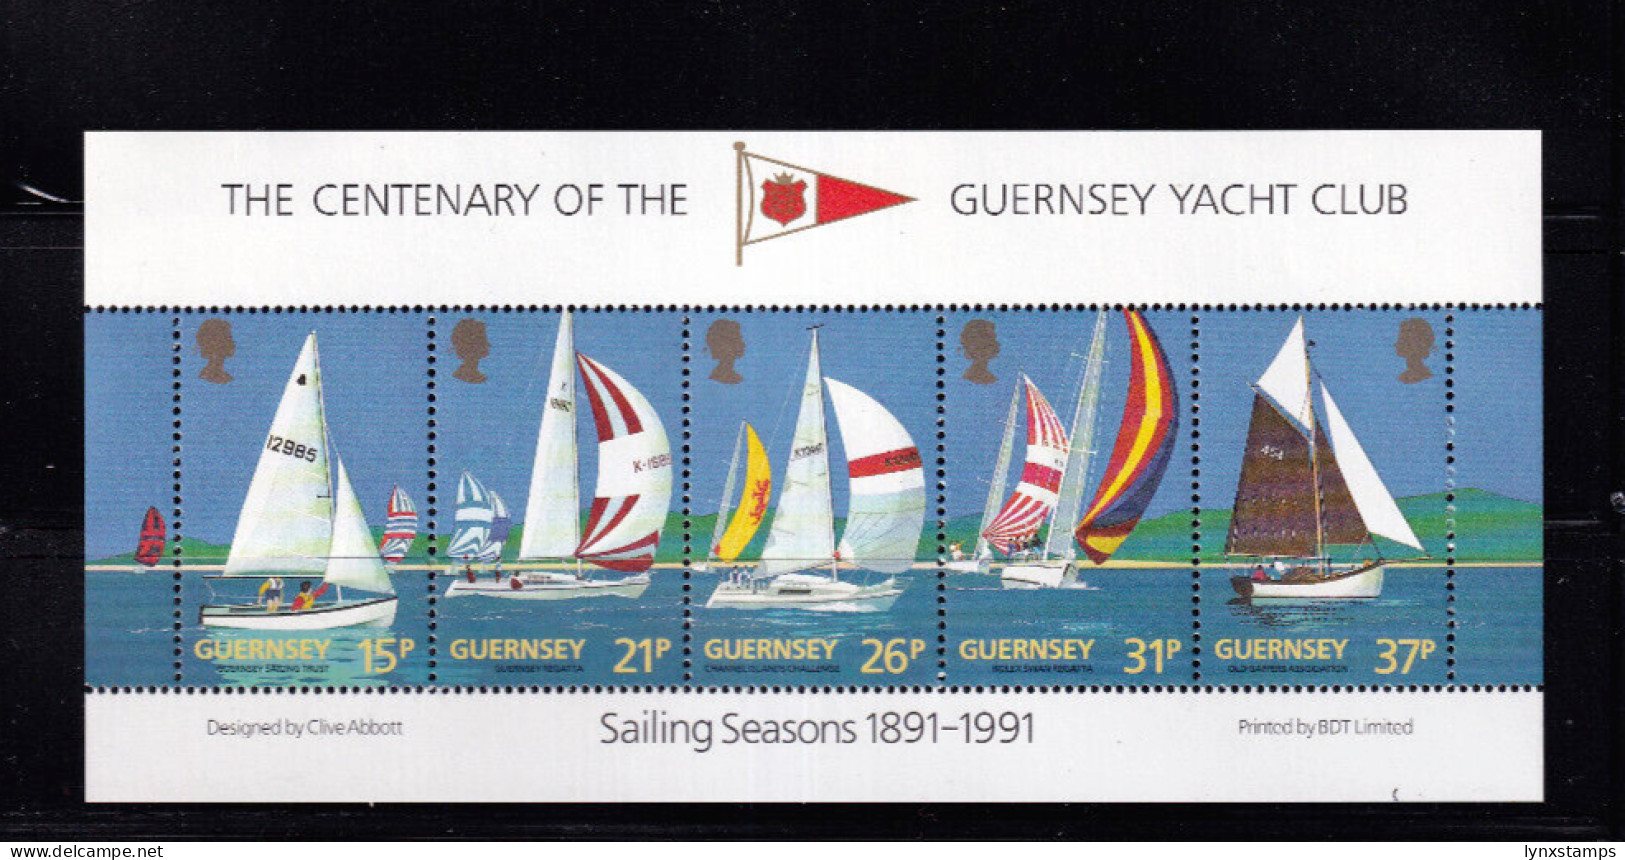 LI06 Guernsey 1991 The 100th Anniversary Of The Guernsey Yacht Club Mini Sheet - Local Issues